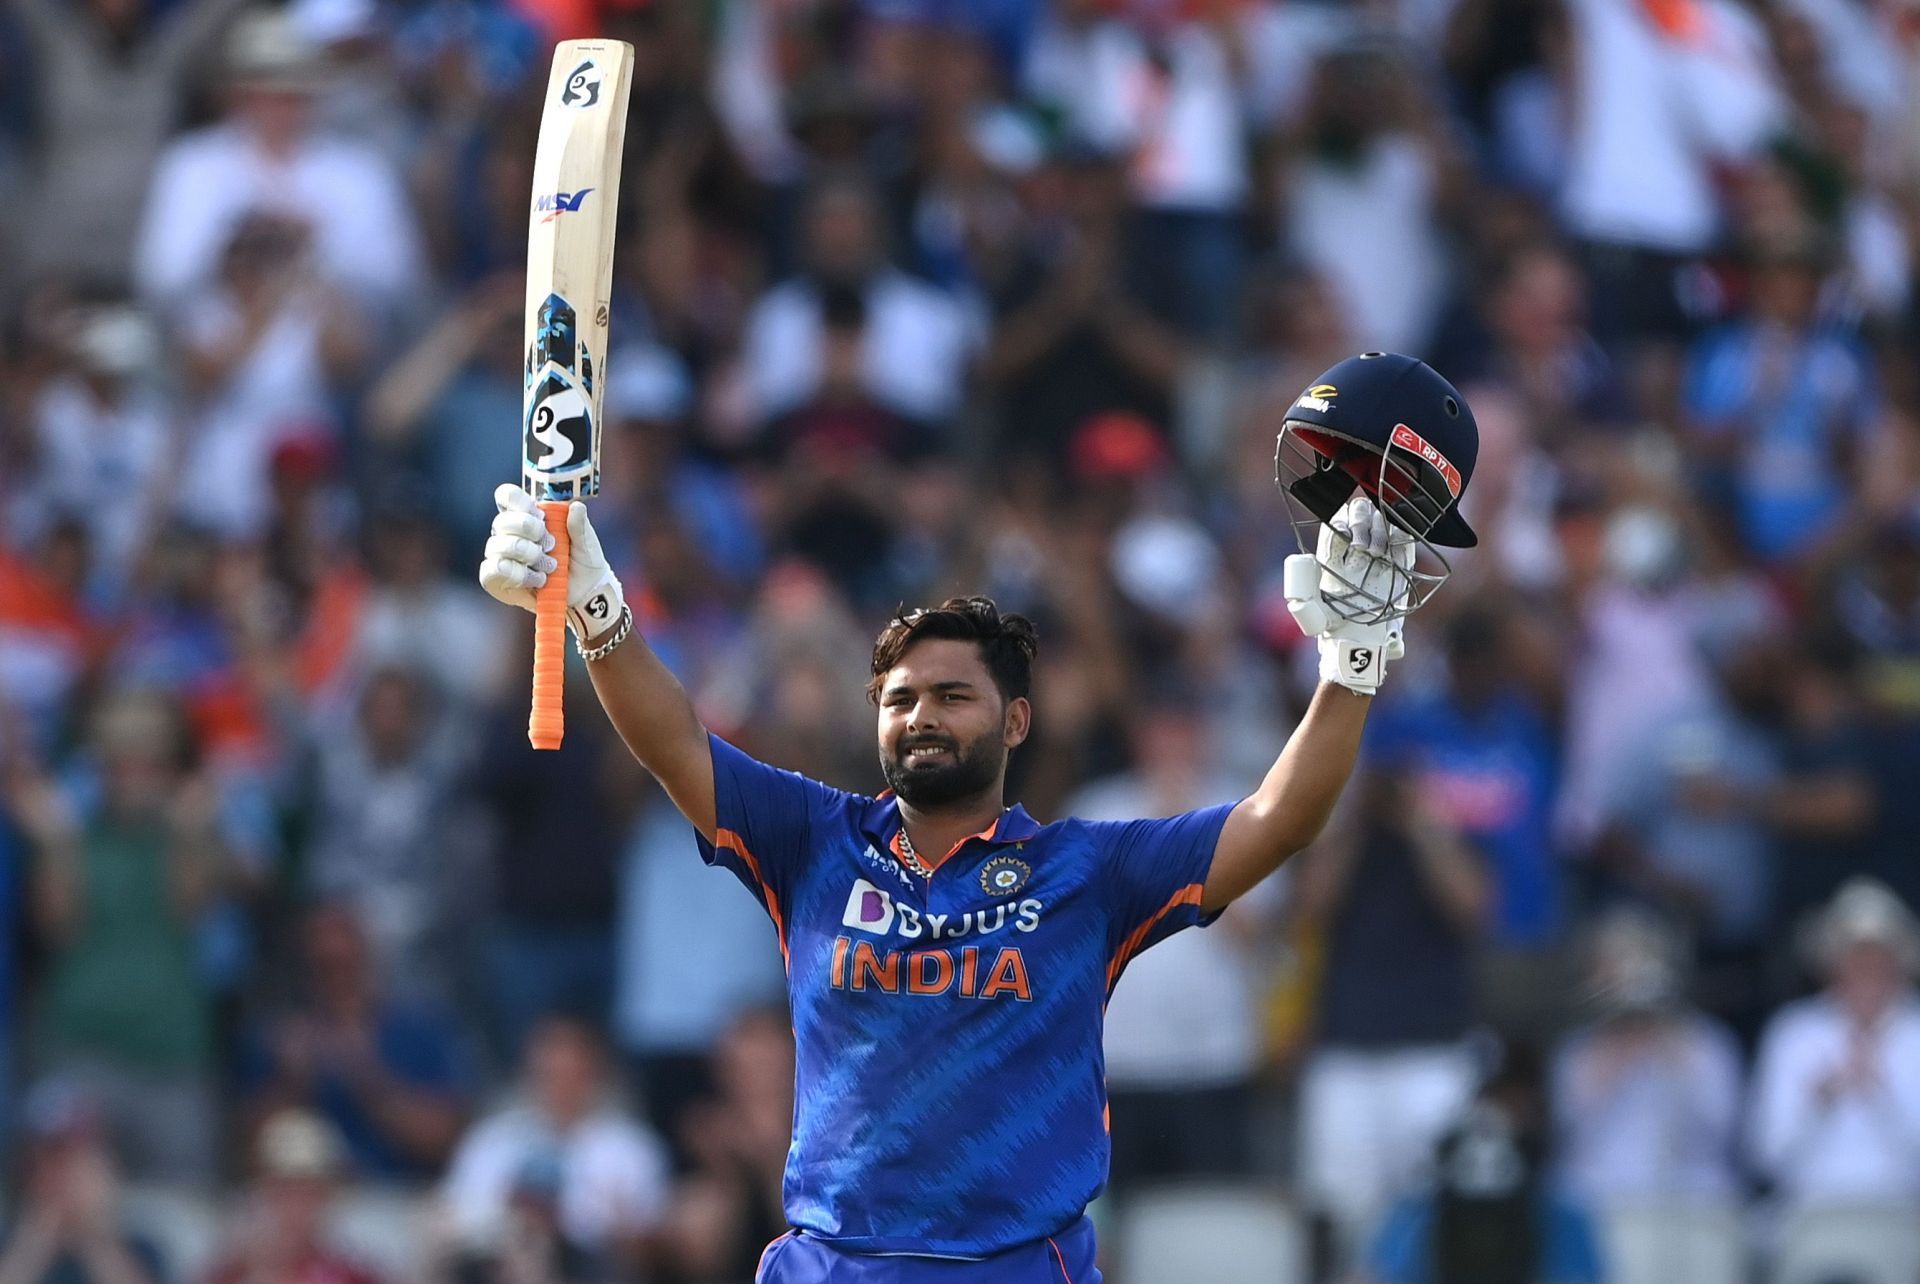 Rishabh Pant celebrates after reaching his maiden ODI hundred. (P.C.:Getty)